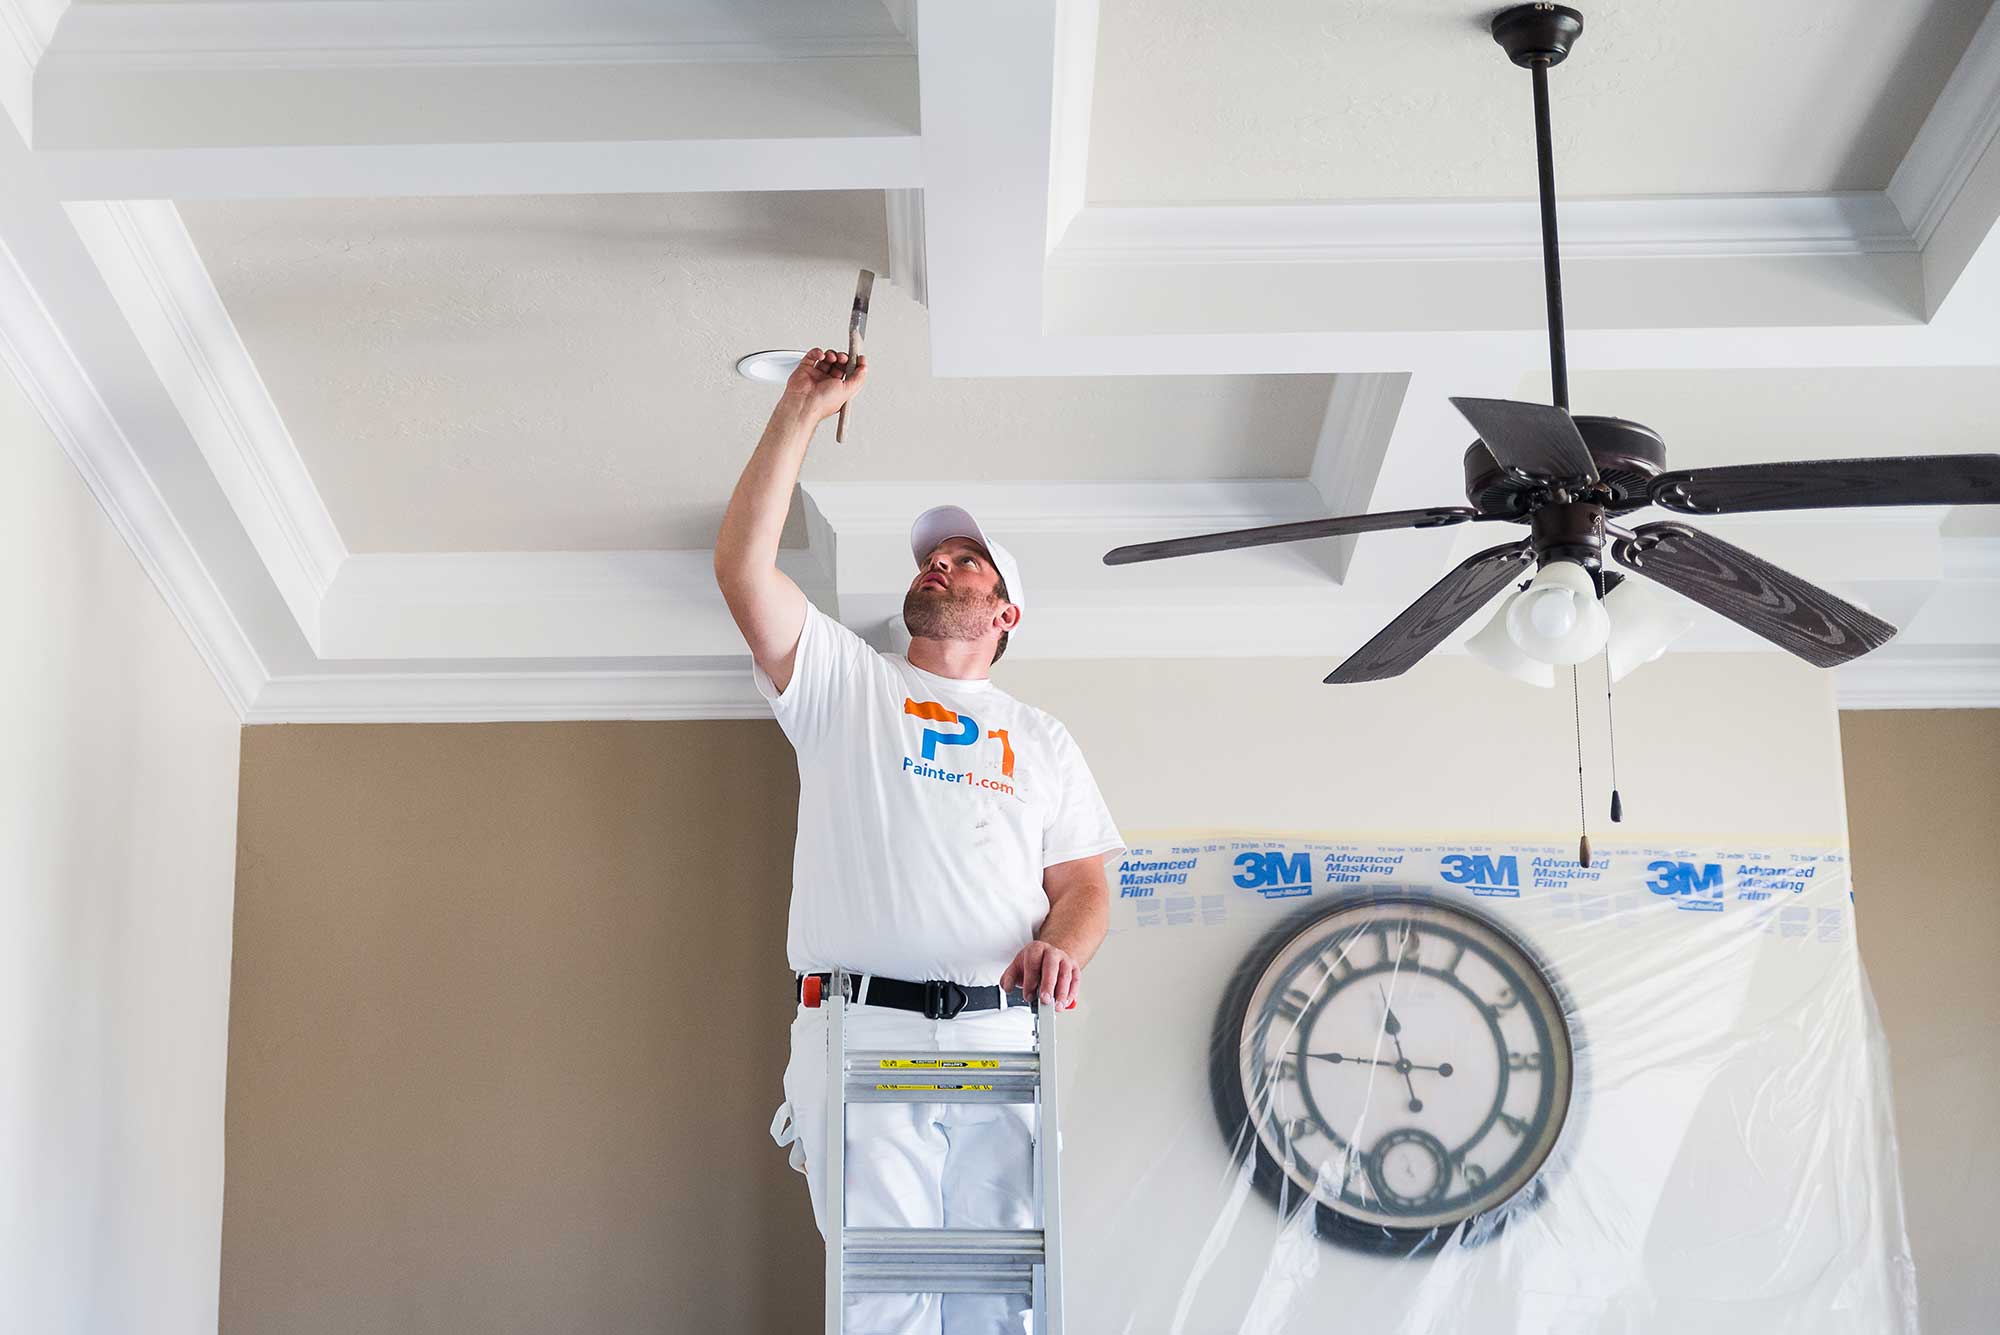 Painter1 of Main Line offers professional popcorn ceiling removal in Malvern / Chester County.